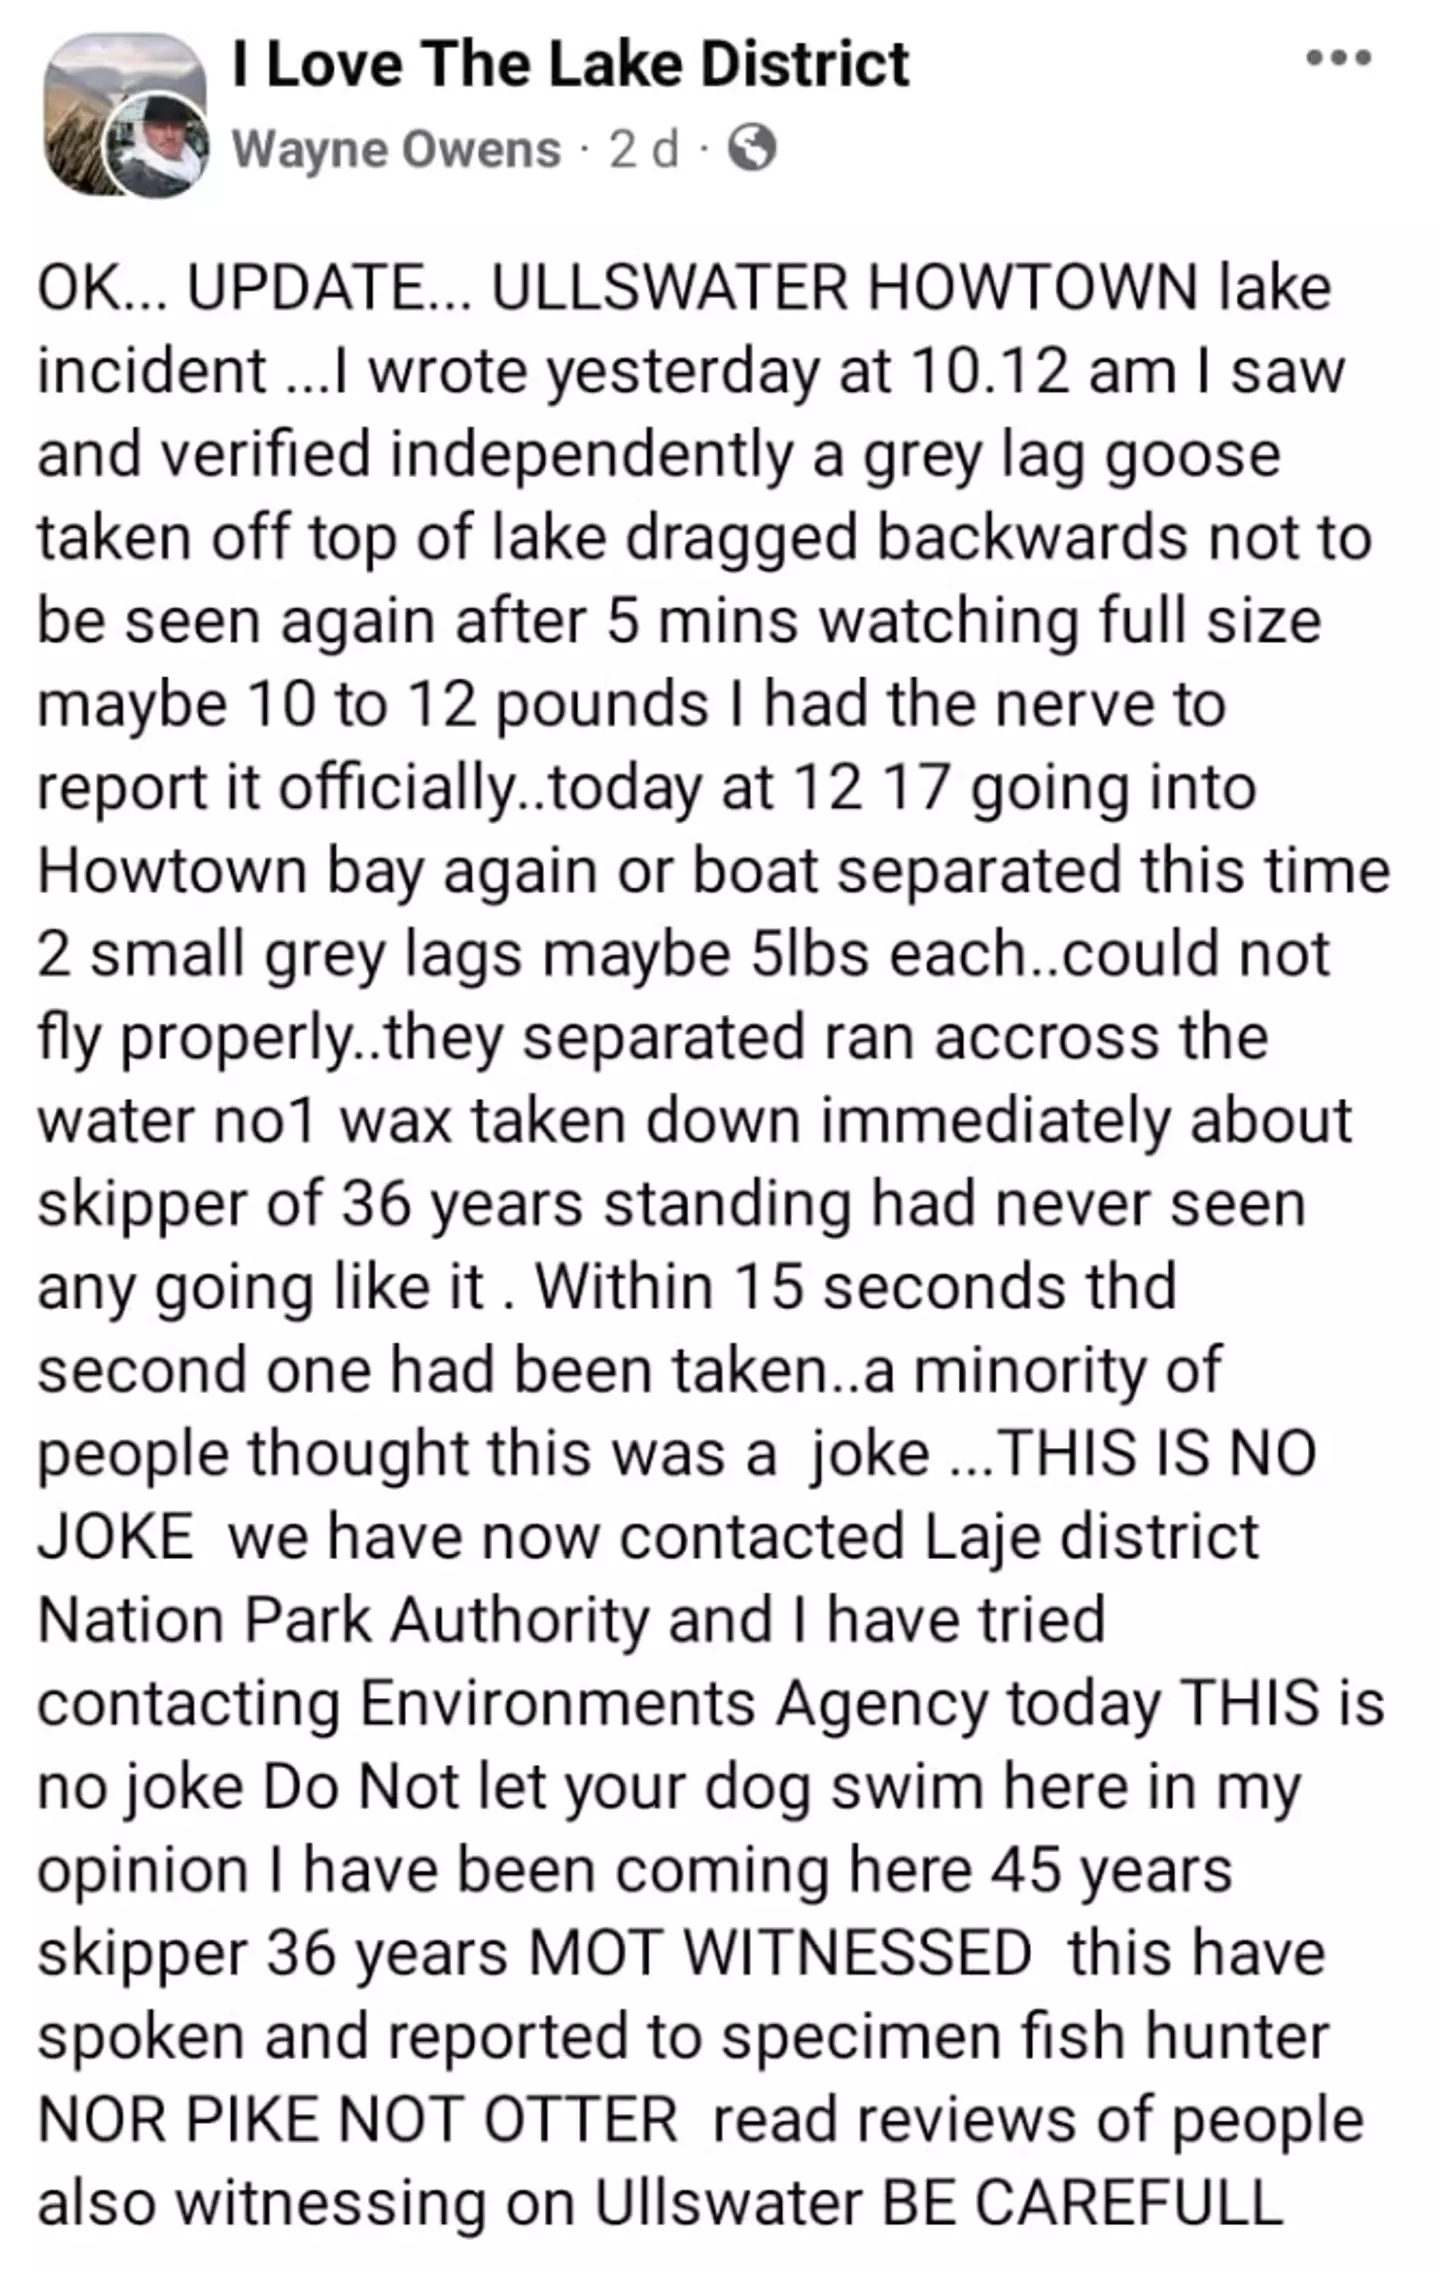 Wayne Owens posted his warning in a group called 'I Love The Lake District'.